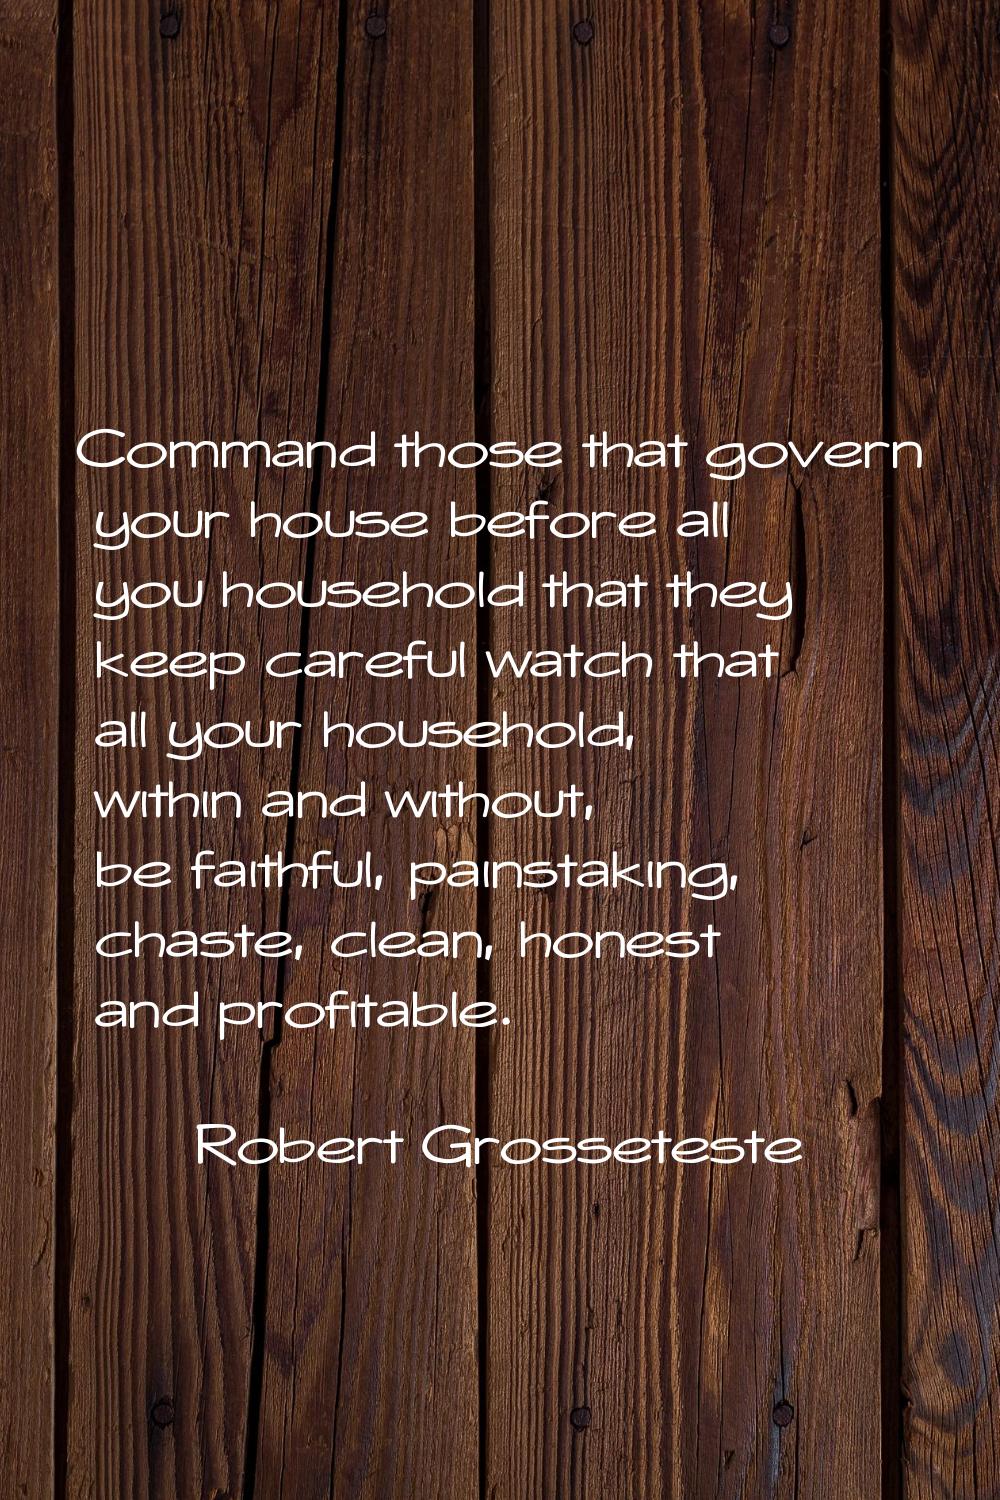 Command those that govern your house before all you household that they keep careful watch that all